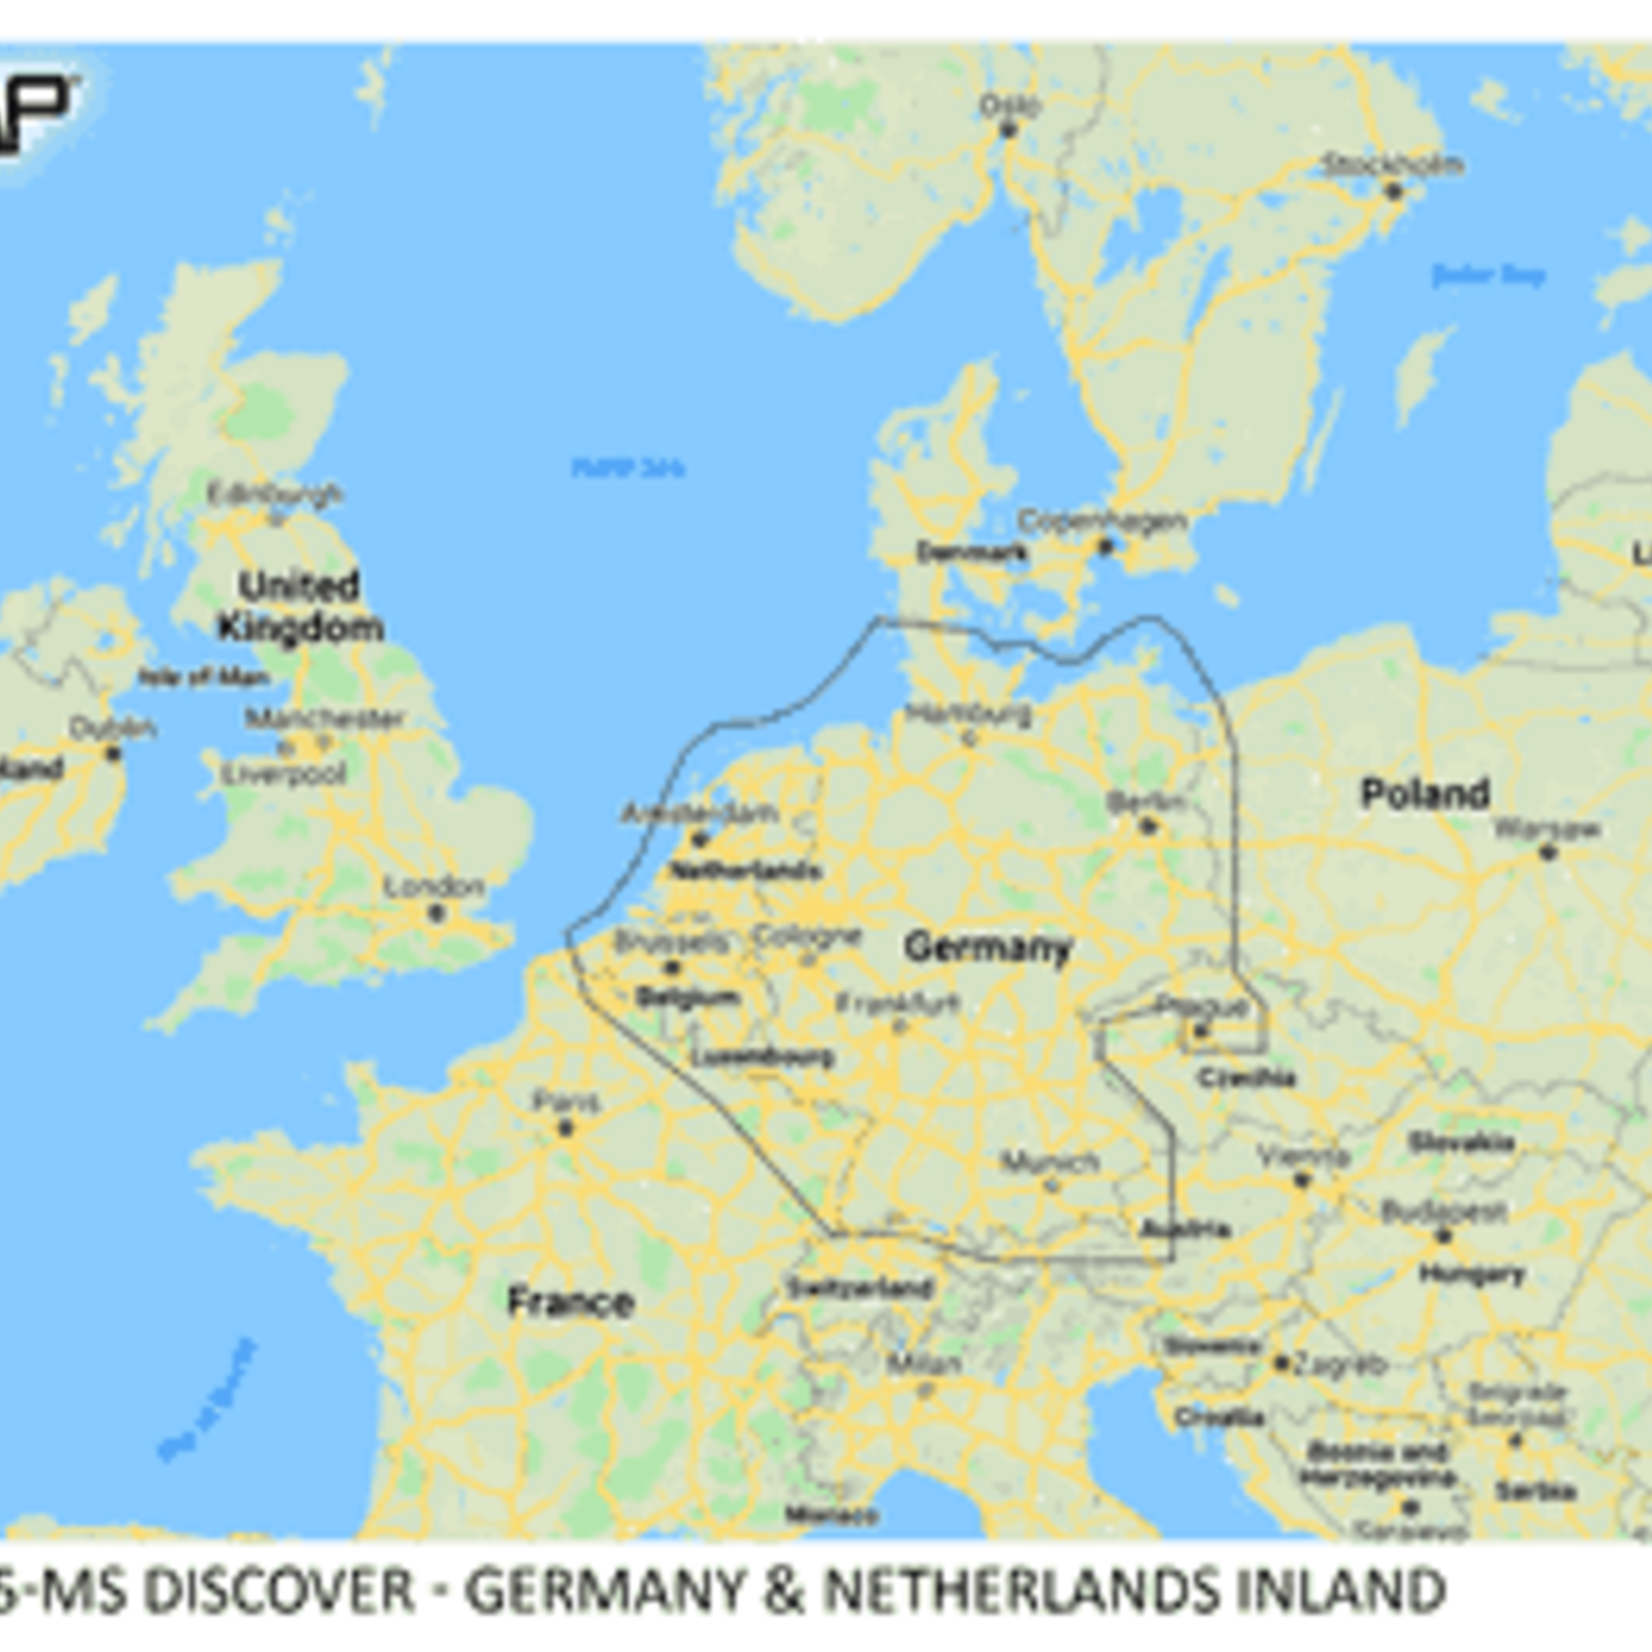 C-MAP DISCOVER - Germany & Netherland Inland